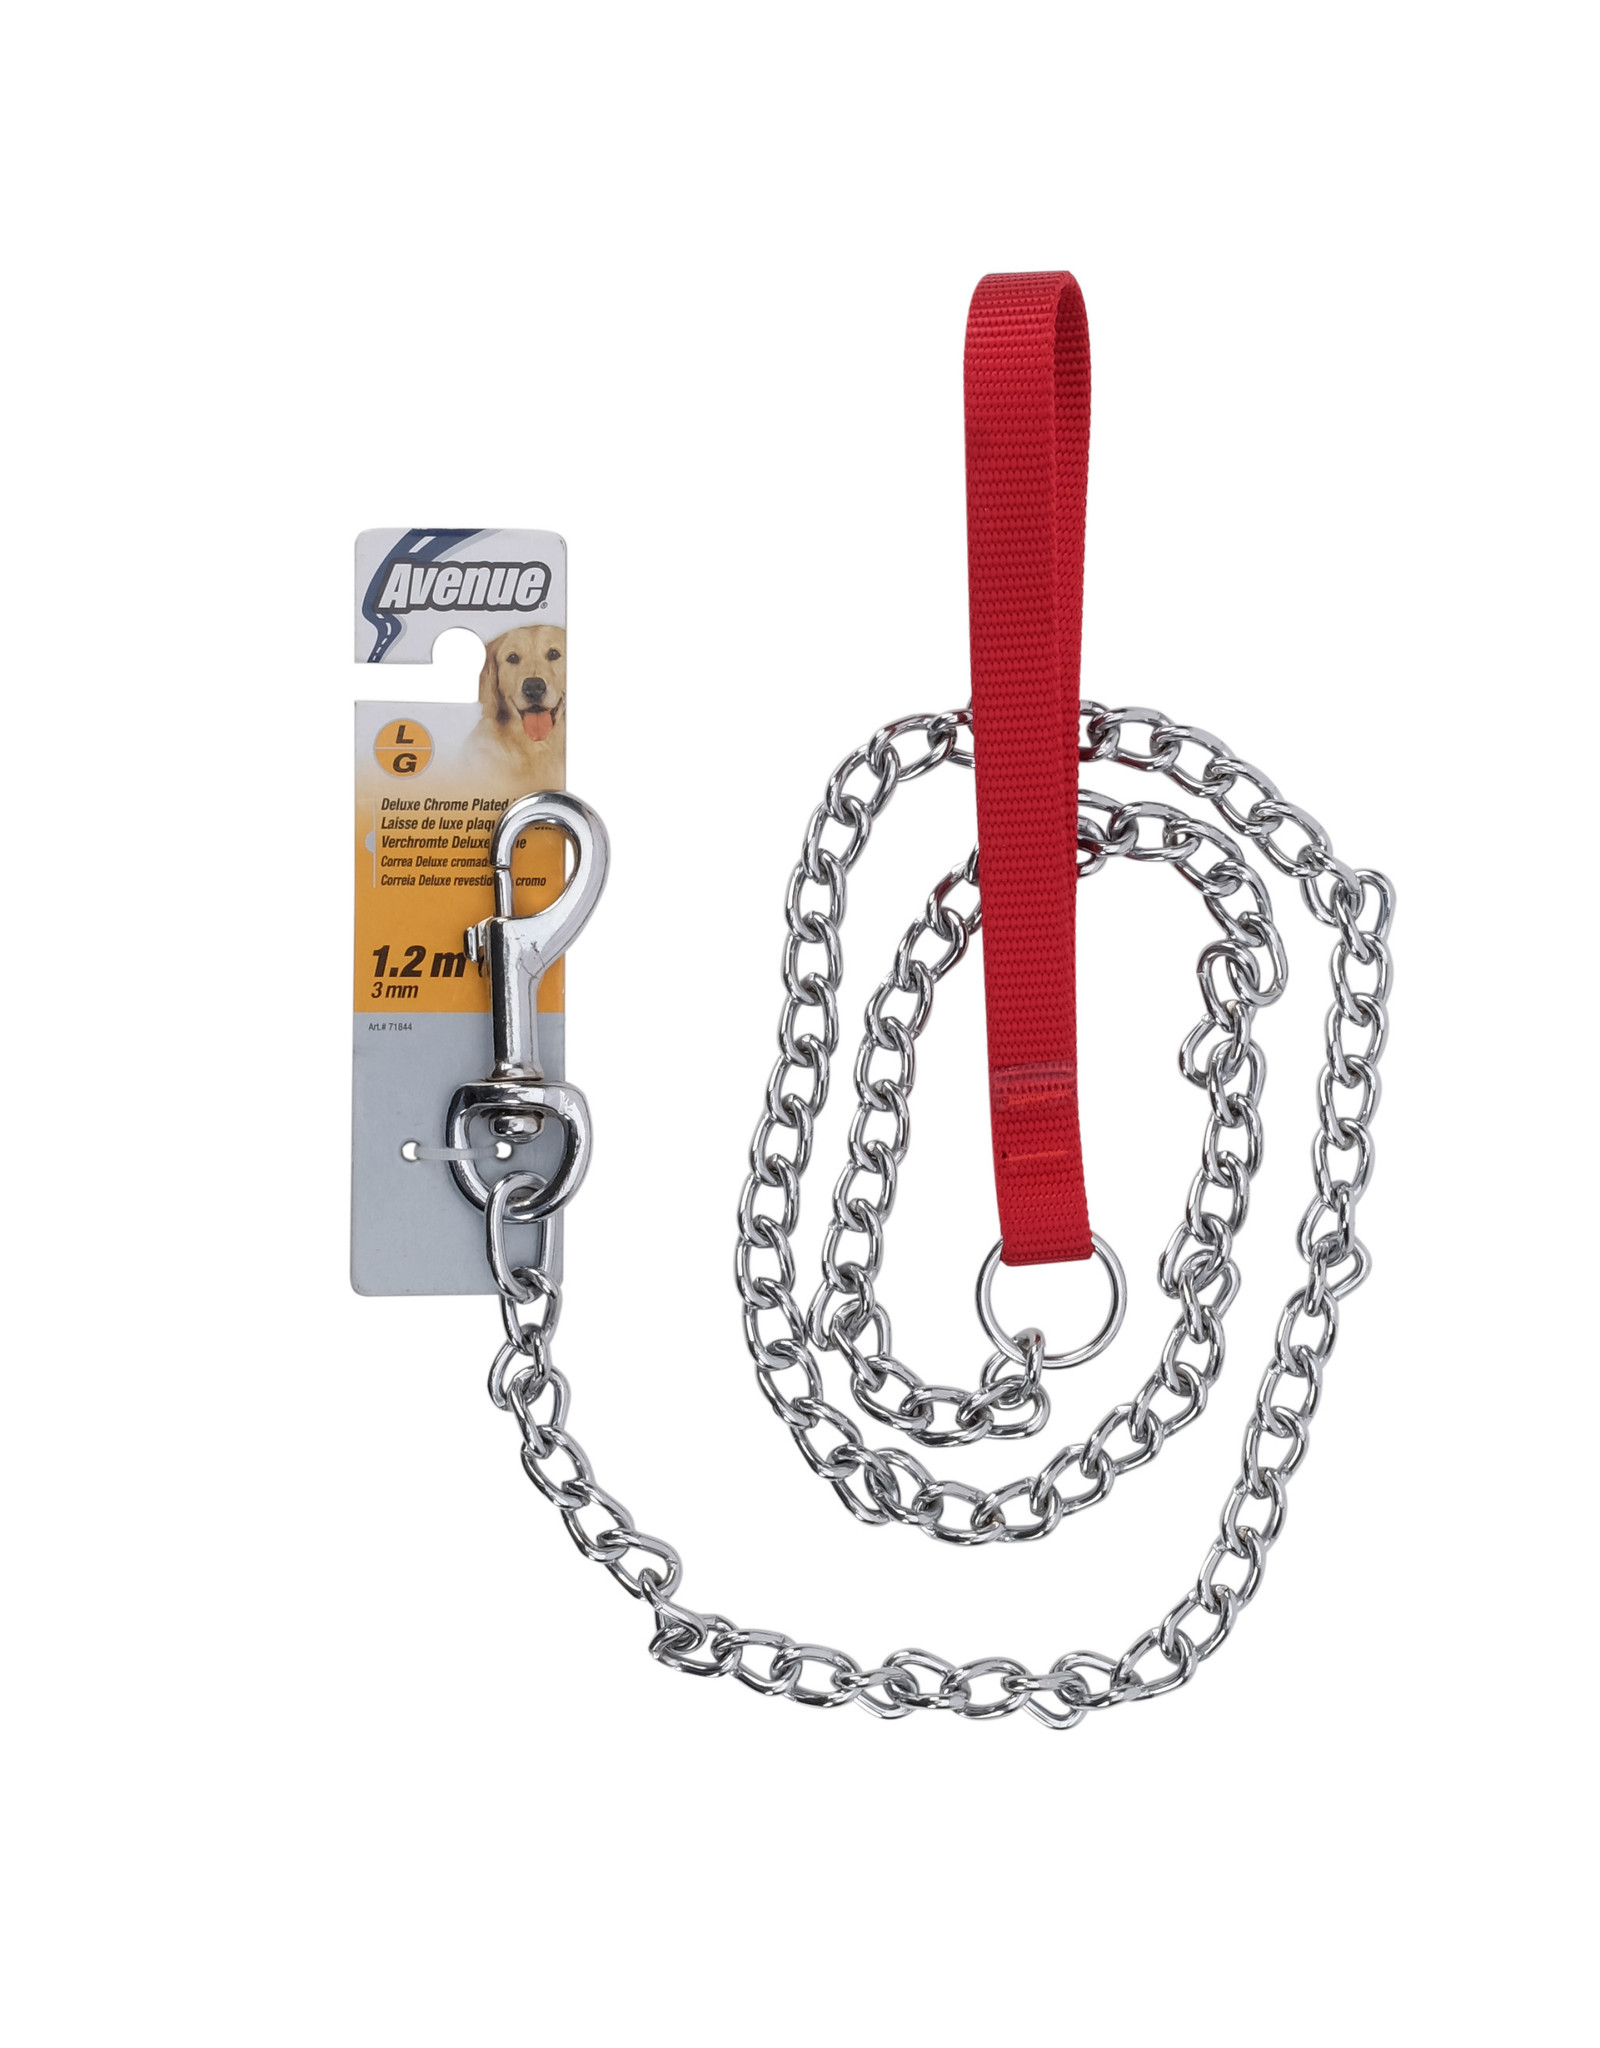 Avenue Deluxe Chrome Plated Leash  Large 1.2m (4')